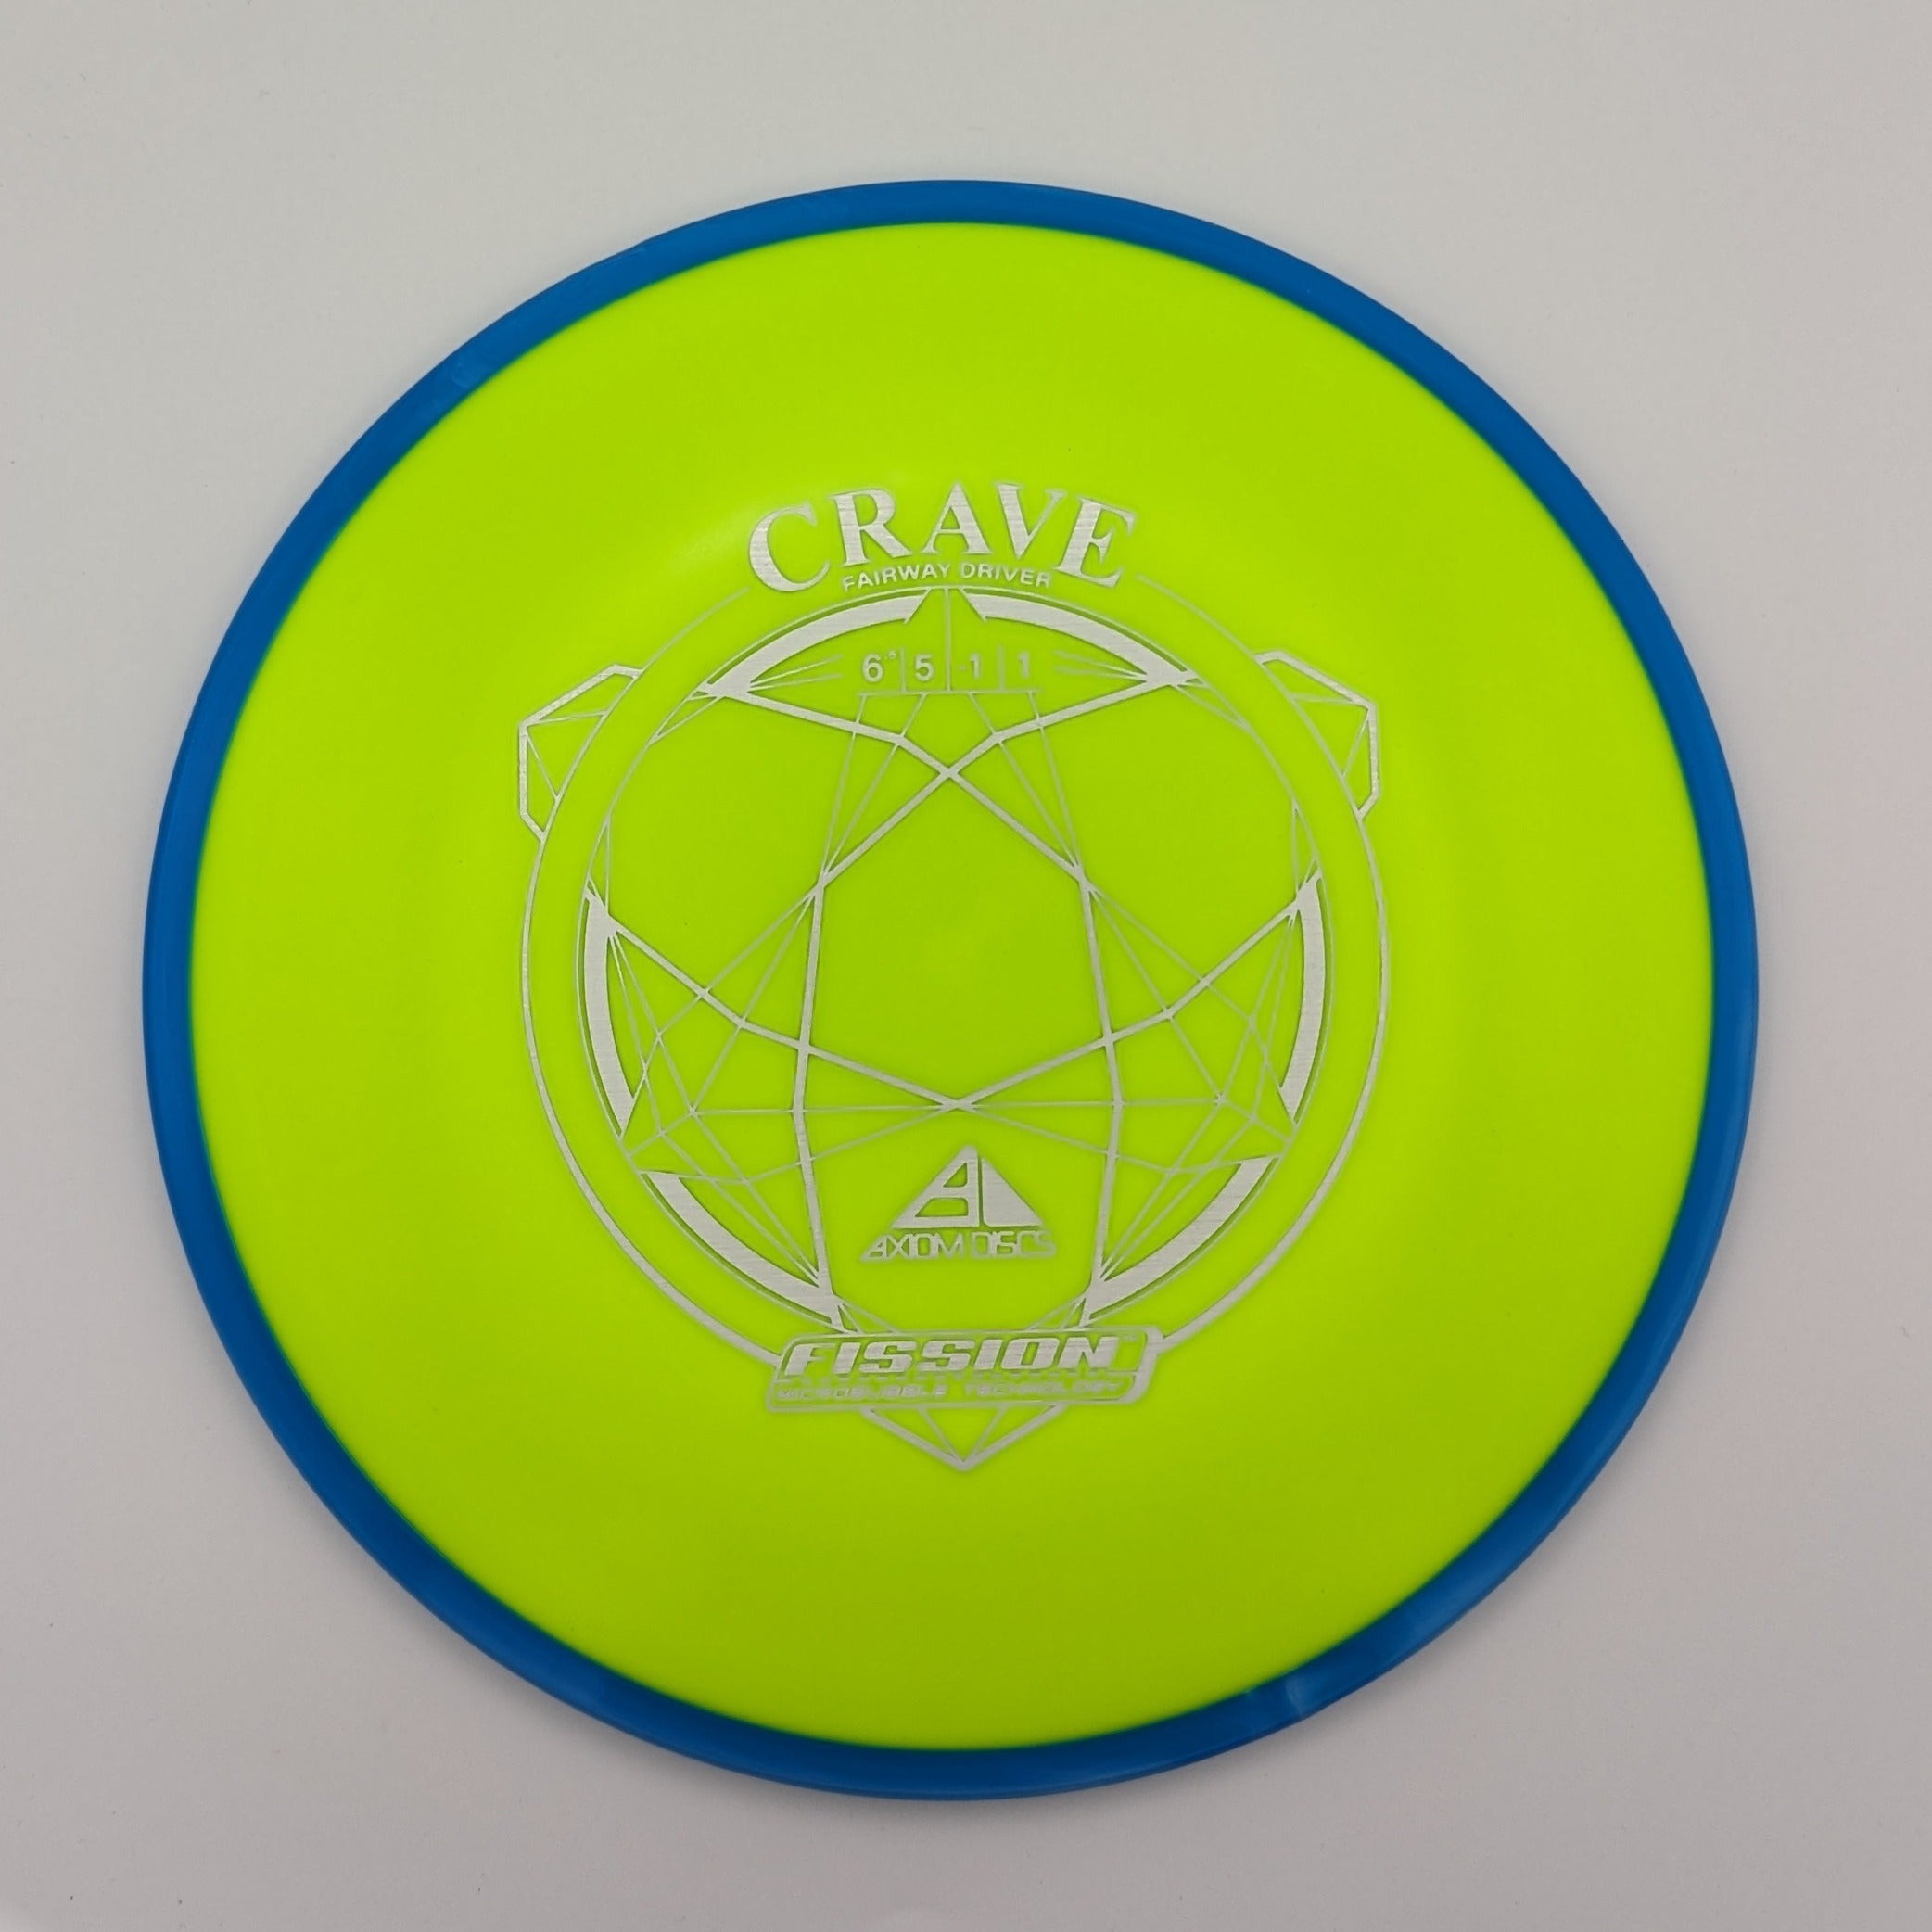 AXIOM Crave Fairway Driver Fission Microbubble Technology Plastic